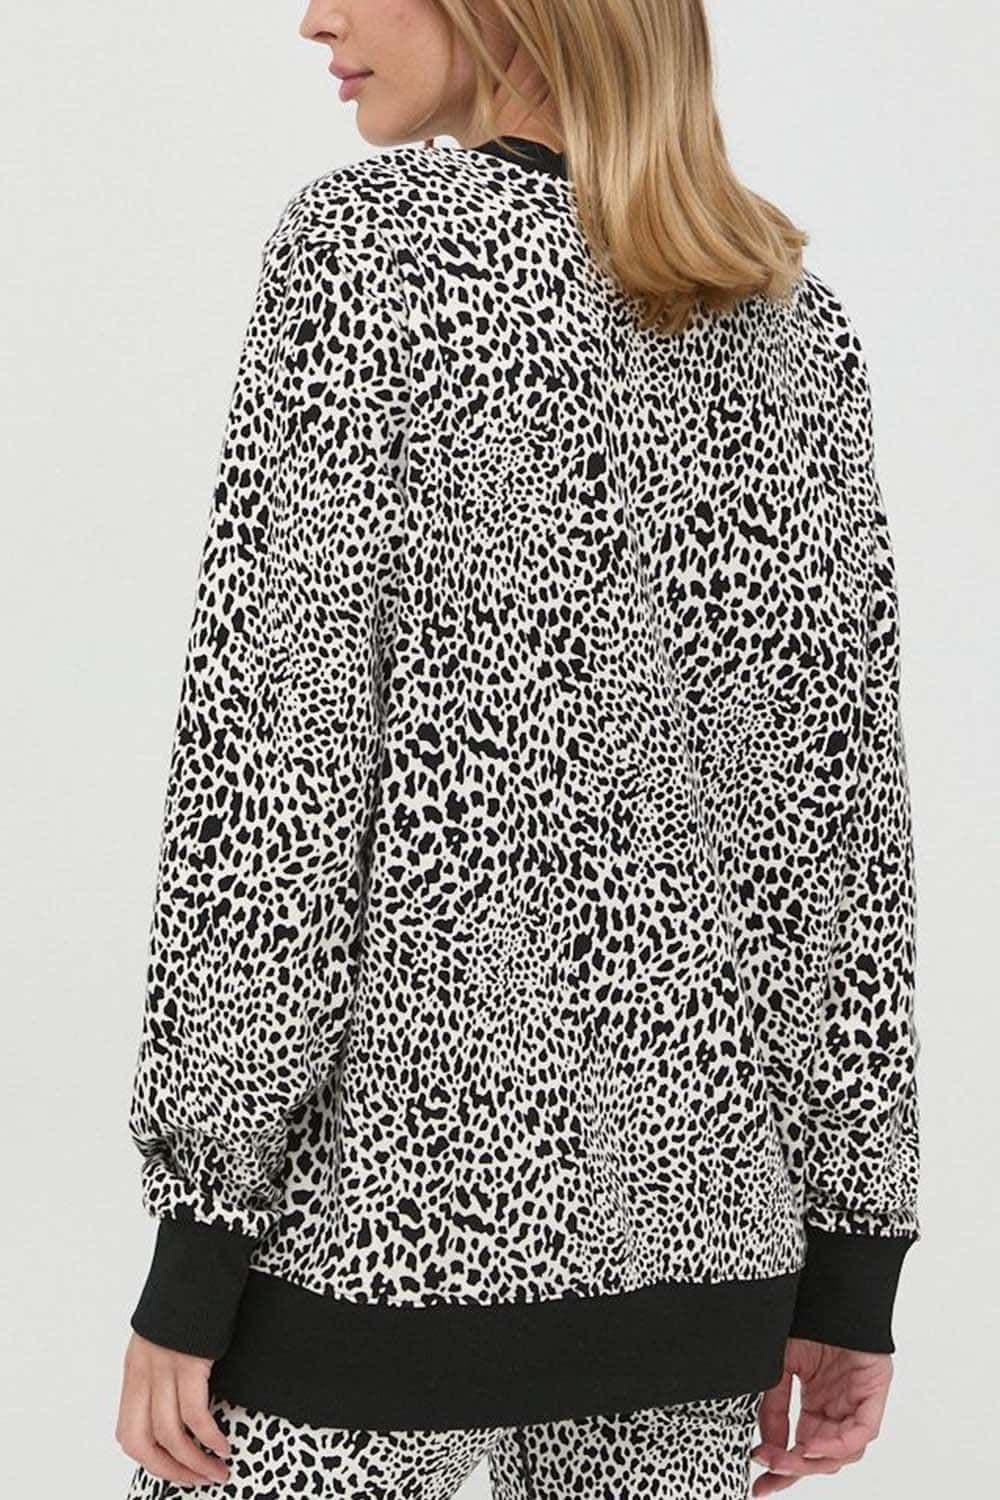 New collection MICHAEL KORS SOFT ORGANIC COTTON TOP IN ANIMAL PRINT